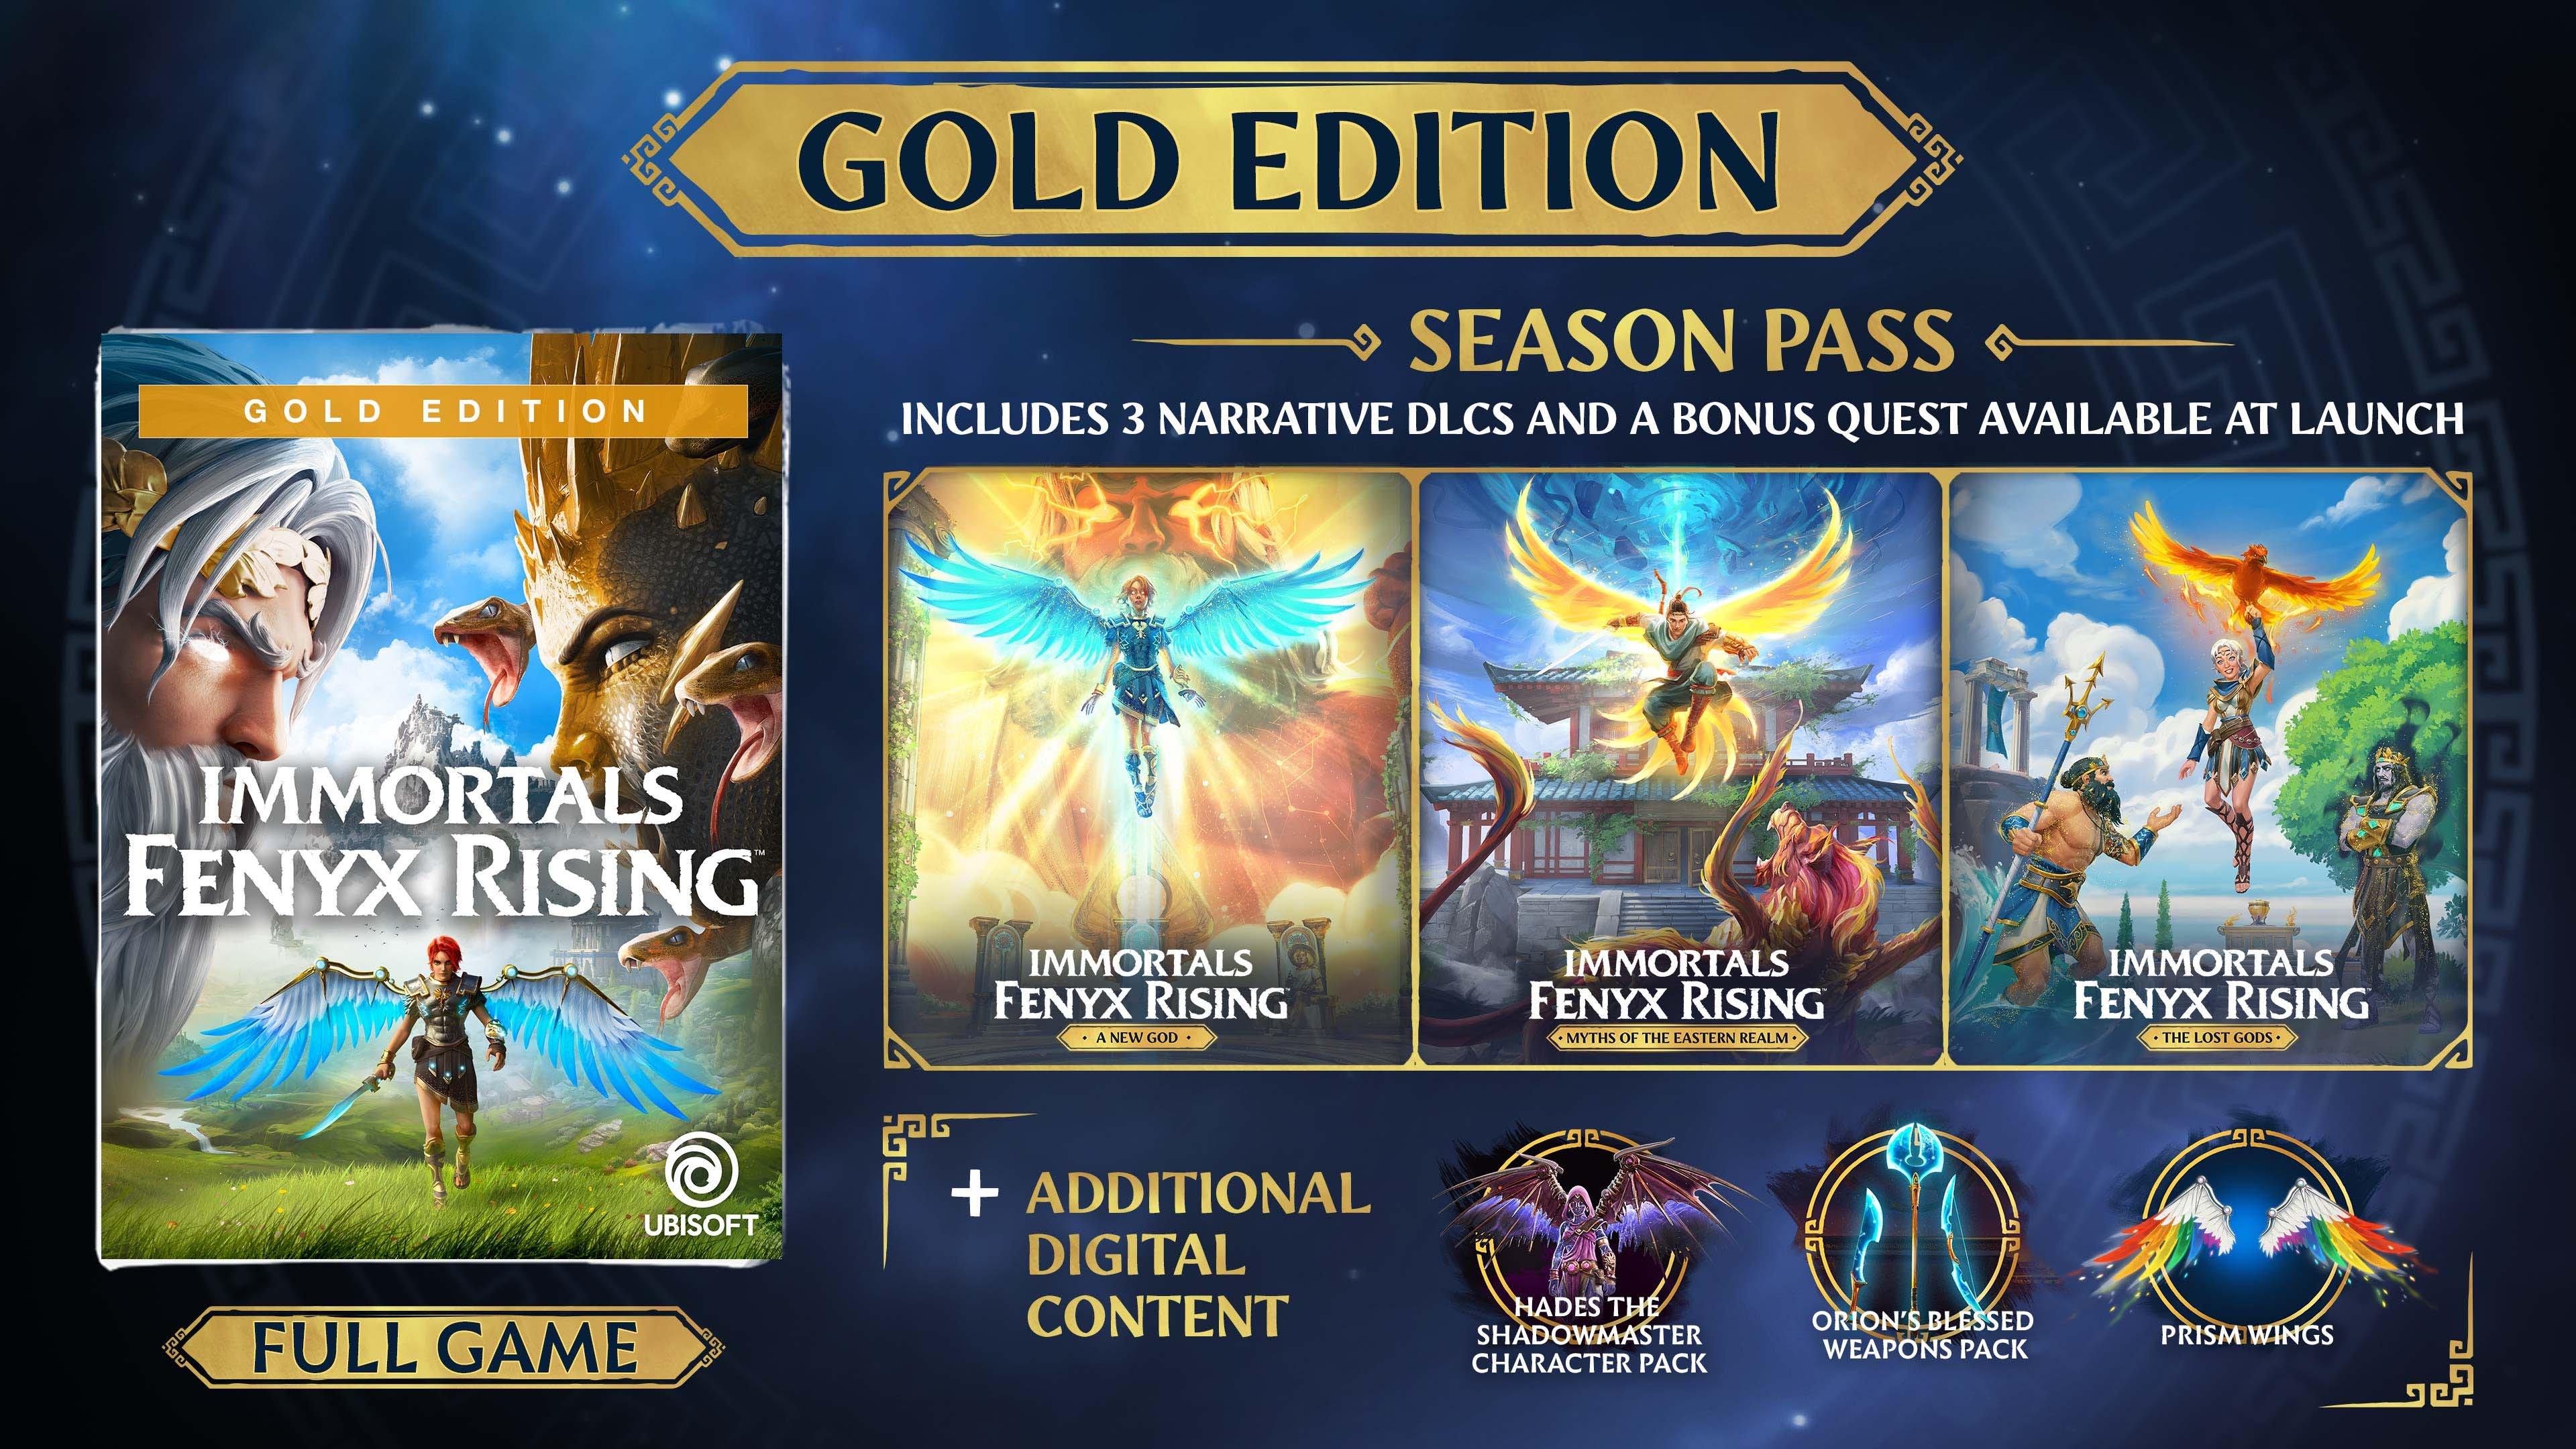 Immortals Fenyx Rising Gold Edition PS4 & PS5 on PS4 PS5 — price